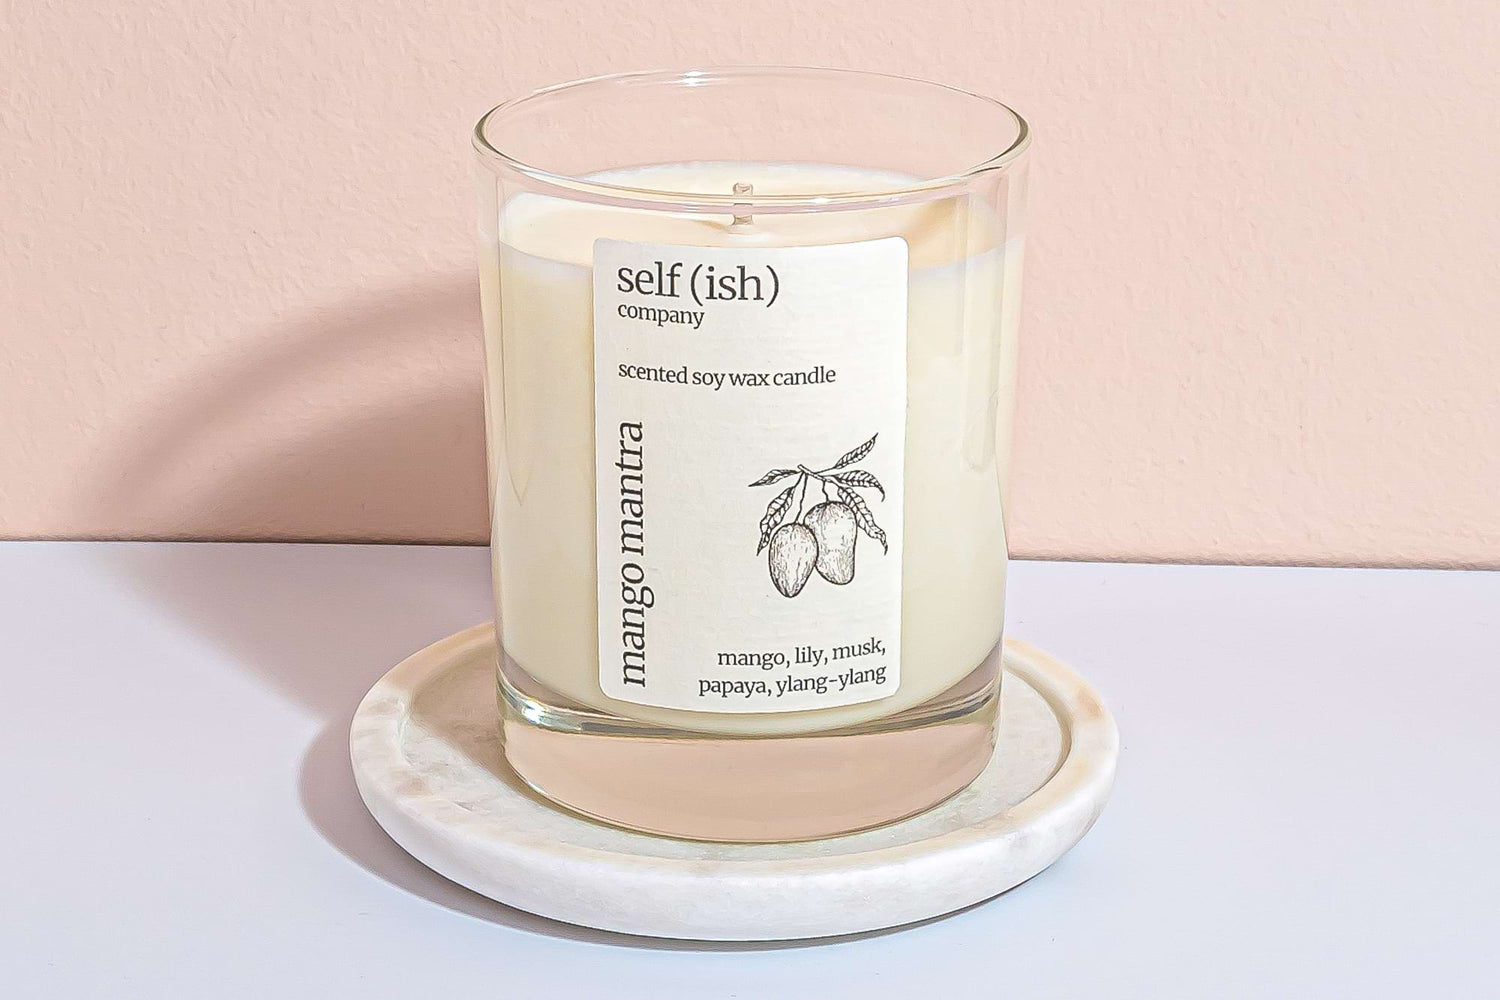 Mango Soy Wax Candle handmade in the UK by Self (ish) Company